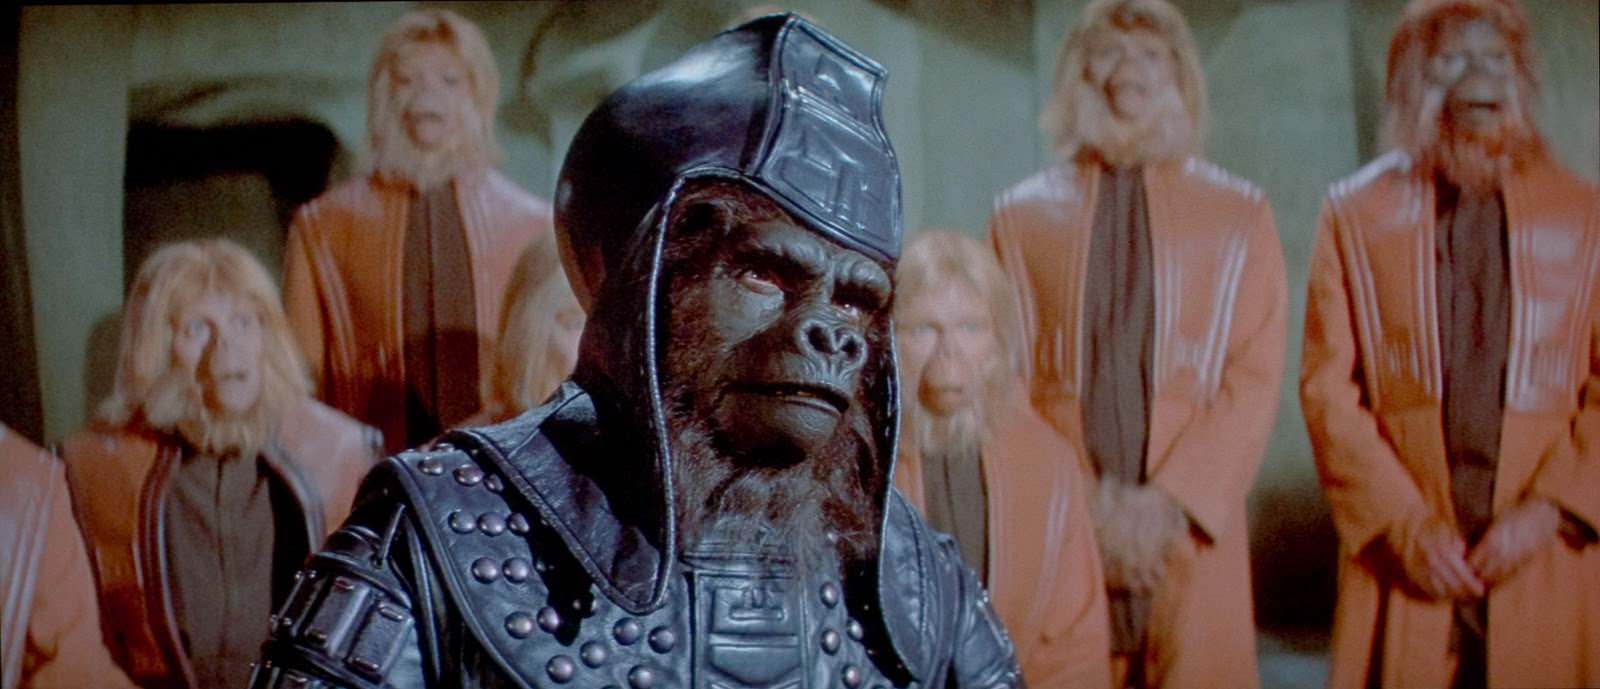 BRD_beneath1_Planet_of_the_Apes_blu-ray